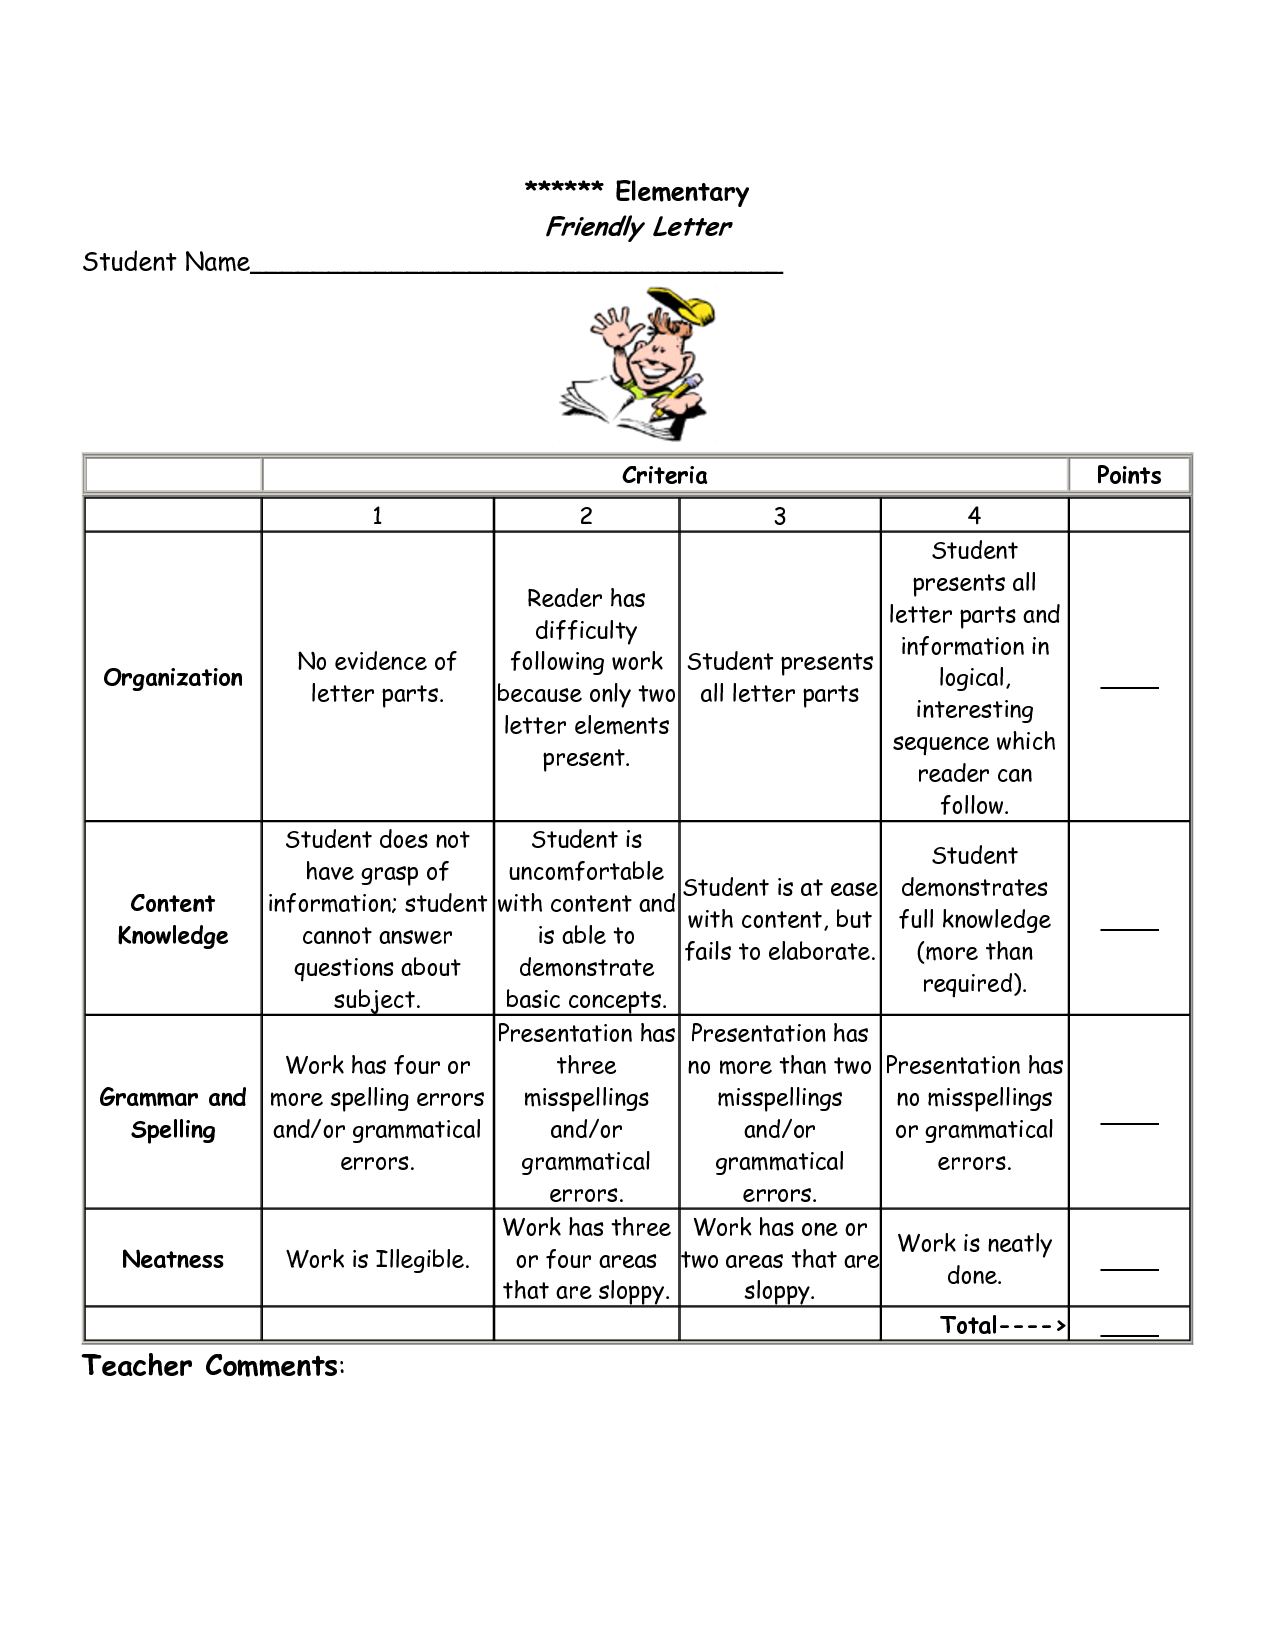 Rubrics For Writing A Friendly Letter